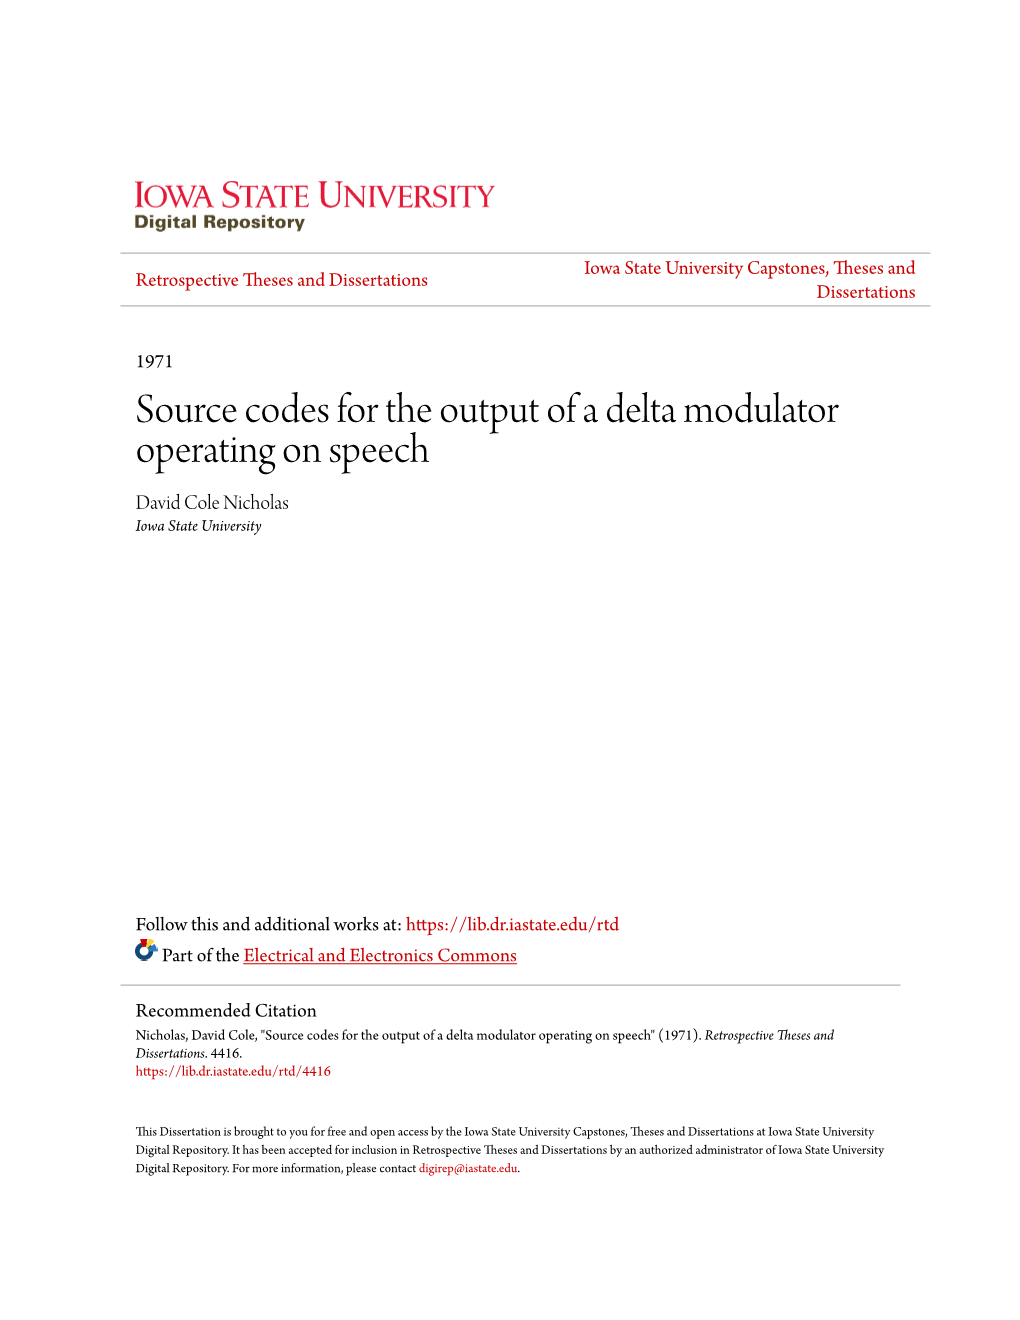 Source Codes for the Output of a Delta Modulator Operating on Speech David Cole Nicholas Iowa State University